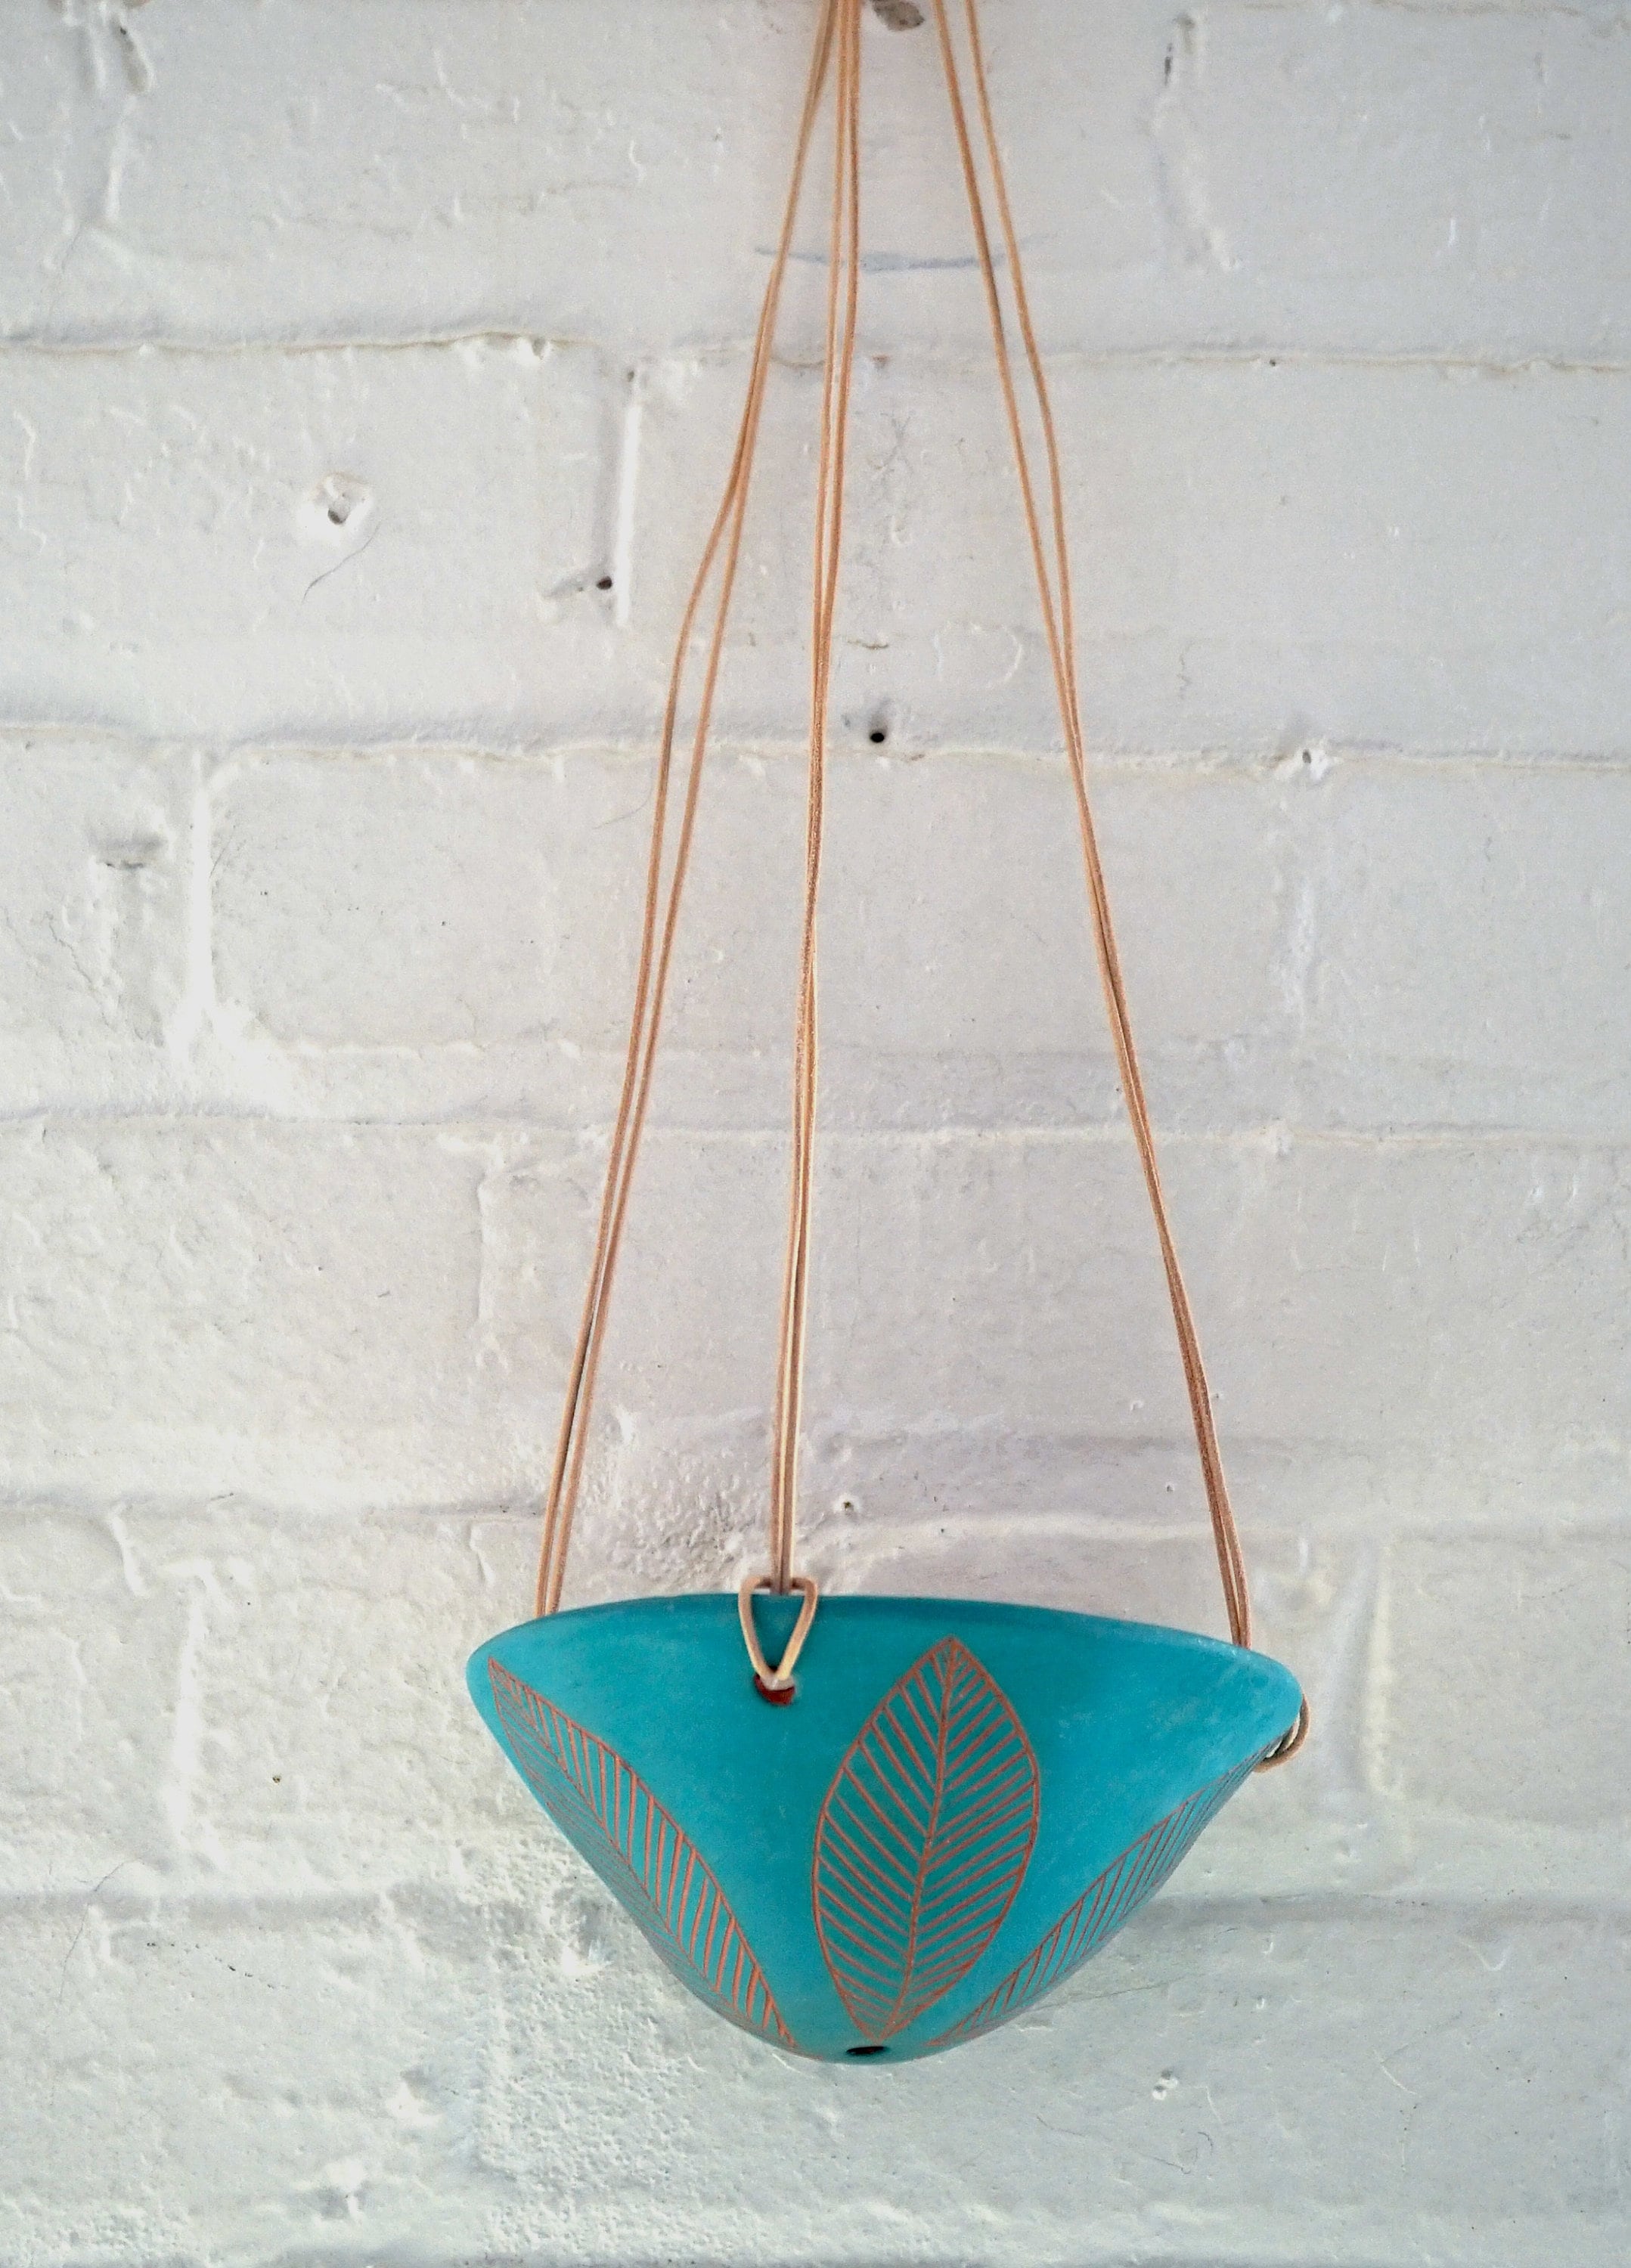 Teal & Terracotta Mini Hanging Planter w/ "Leaf" Design - Mini Hanging Pot with Carvings - Succulent, Cactus, Herb, Air Plant